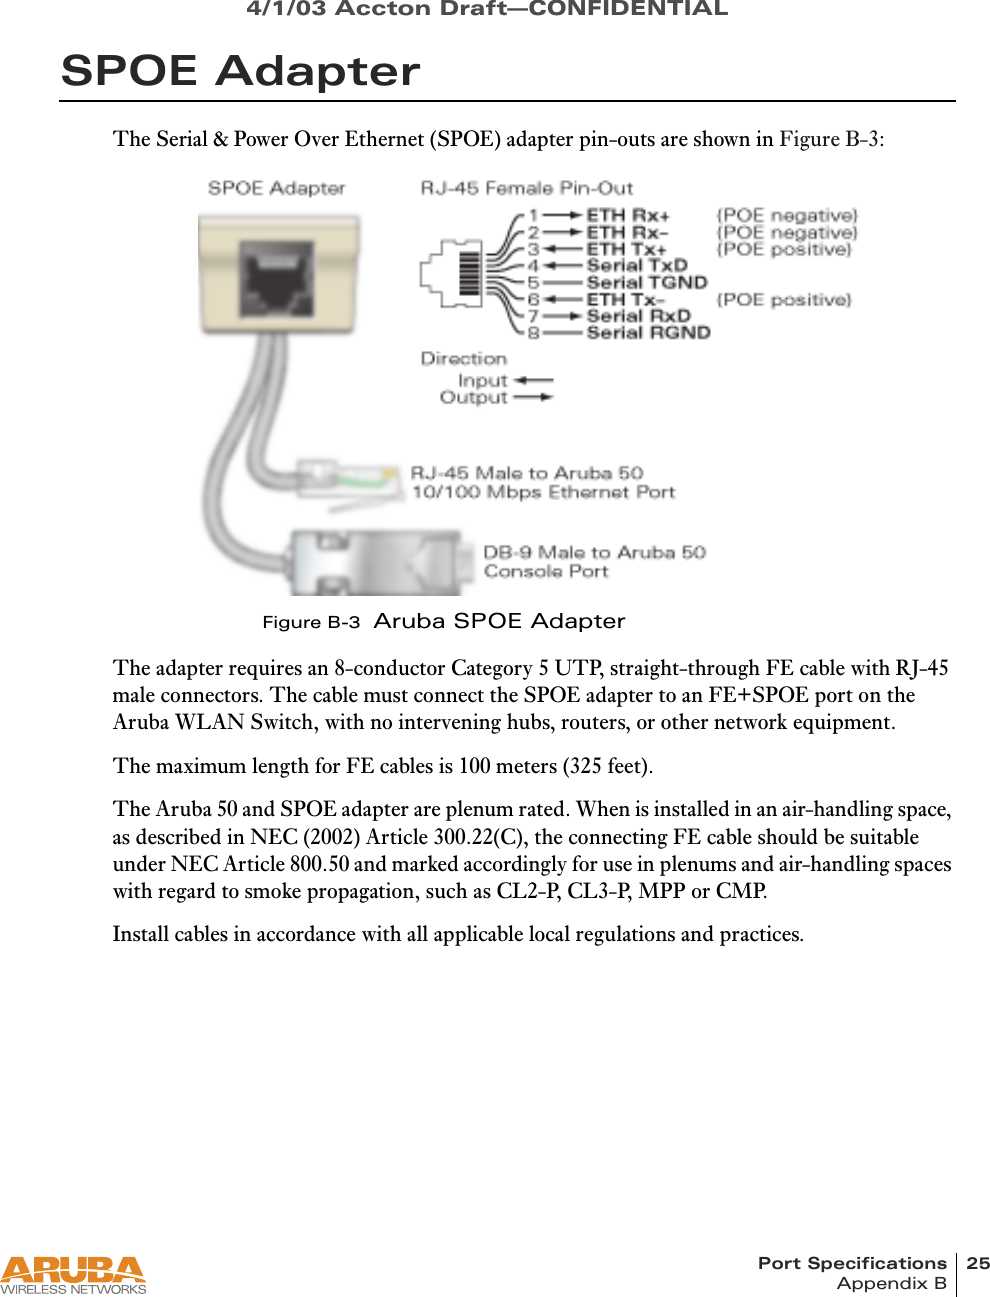 Port Specifications 25Appendix B4/1/03 Accton Draft—CONFIDENTIALSPOE AdapterThe Serial &amp; Power Over Ethernet (SPOE) adapter pin-outs are shown in Figure B-3:Figure B-3  Aruba SPOE AdapterThe adapter requires an 8-conductor Category 5 UTP, straight-through FE cable with RJ-45 male connectors. The cable must connect the SPOE adapter to an FE+SPOE port on the Aruba WLAN Switch, with no intervening hubs, routers, or other network equipment.The maximum length for FE cables is 100 meters (325 feet).The Aruba 50 and SPOE adapter are plenum rated. When is installed in an air-handling space, as described in NEC (2002) Article 300.22(C), the connecting FE cable should be suitable under NEC Article 800.50 and marked accordingly for use in plenums and air-handling spaces with regard to smoke propagation, such as CL2-P, CL3-P, MPP or CMP.Install cables in accordance with all applicable local regulations and practices.